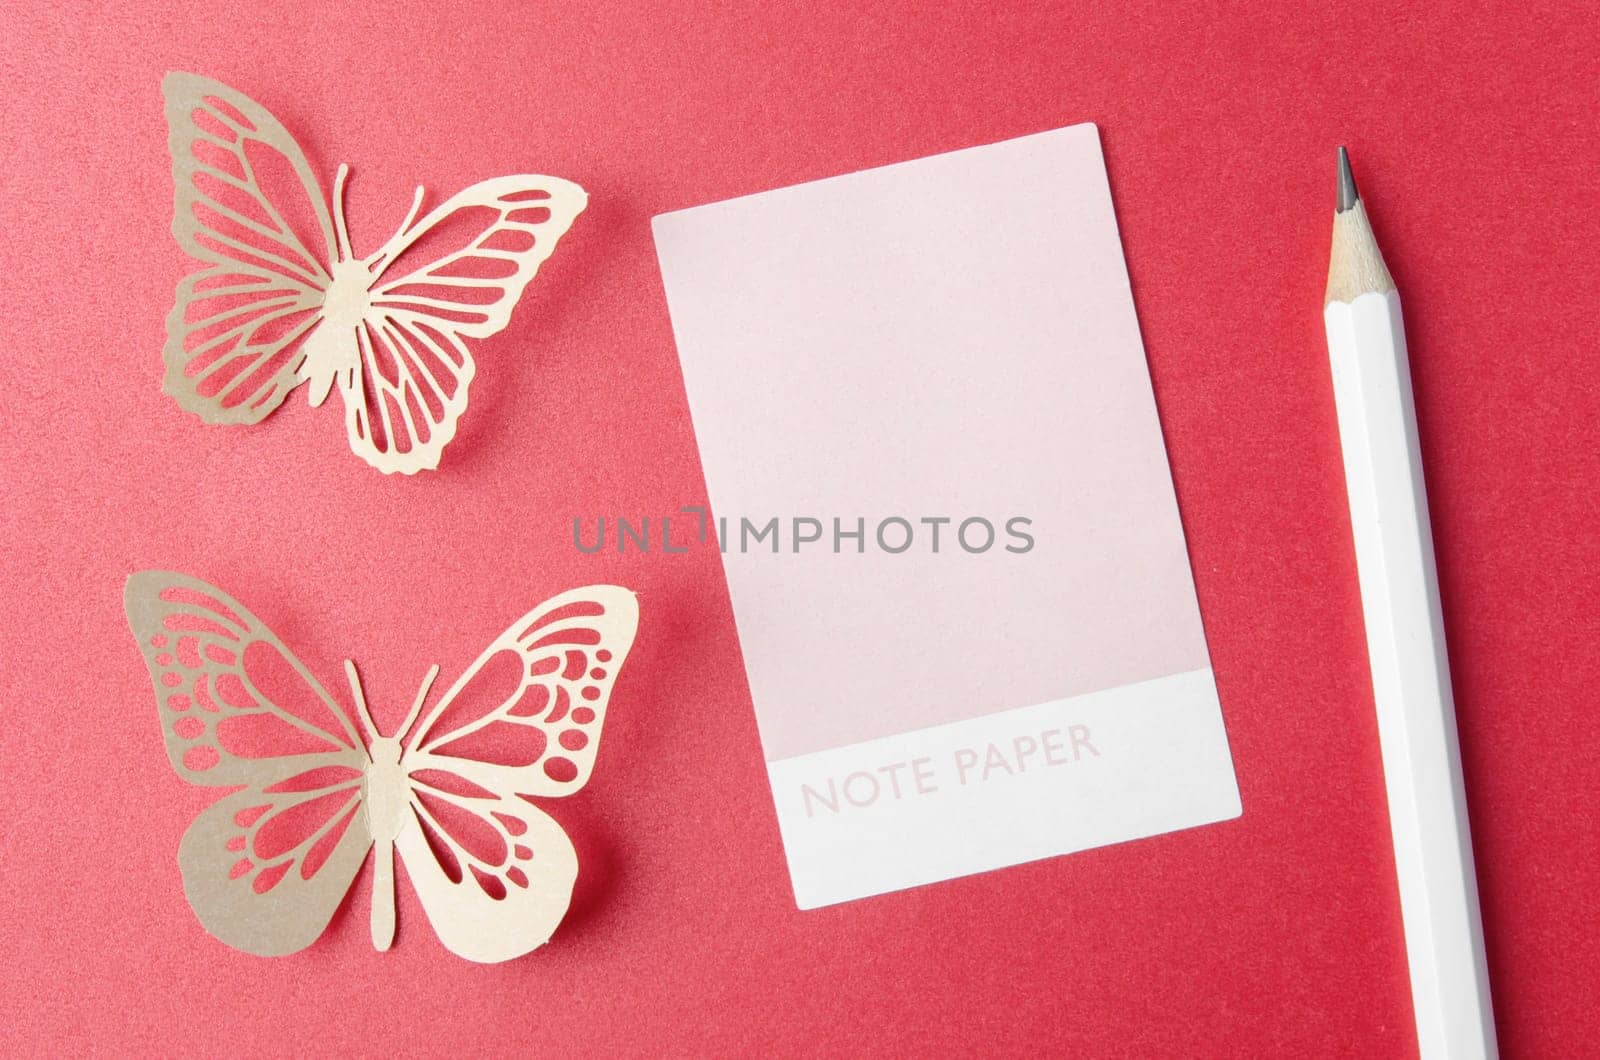 The Blank Note Paper and carve of paper butterfly with pencil on red background, space for text. by Gamjai